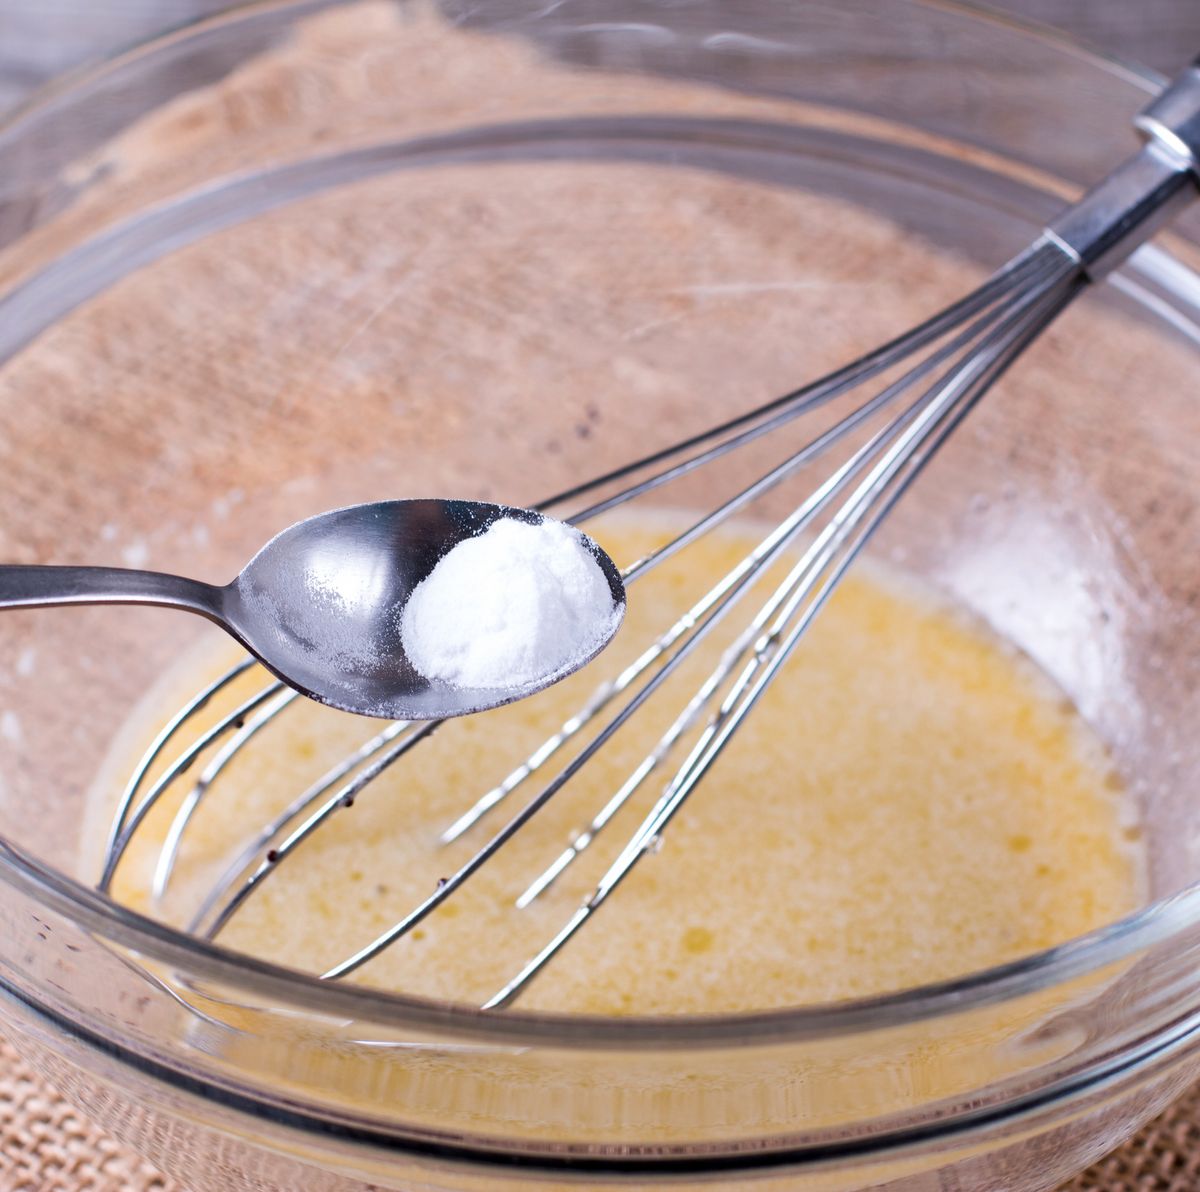 8 Substitutes for Baking Powder to Use When You Run Out